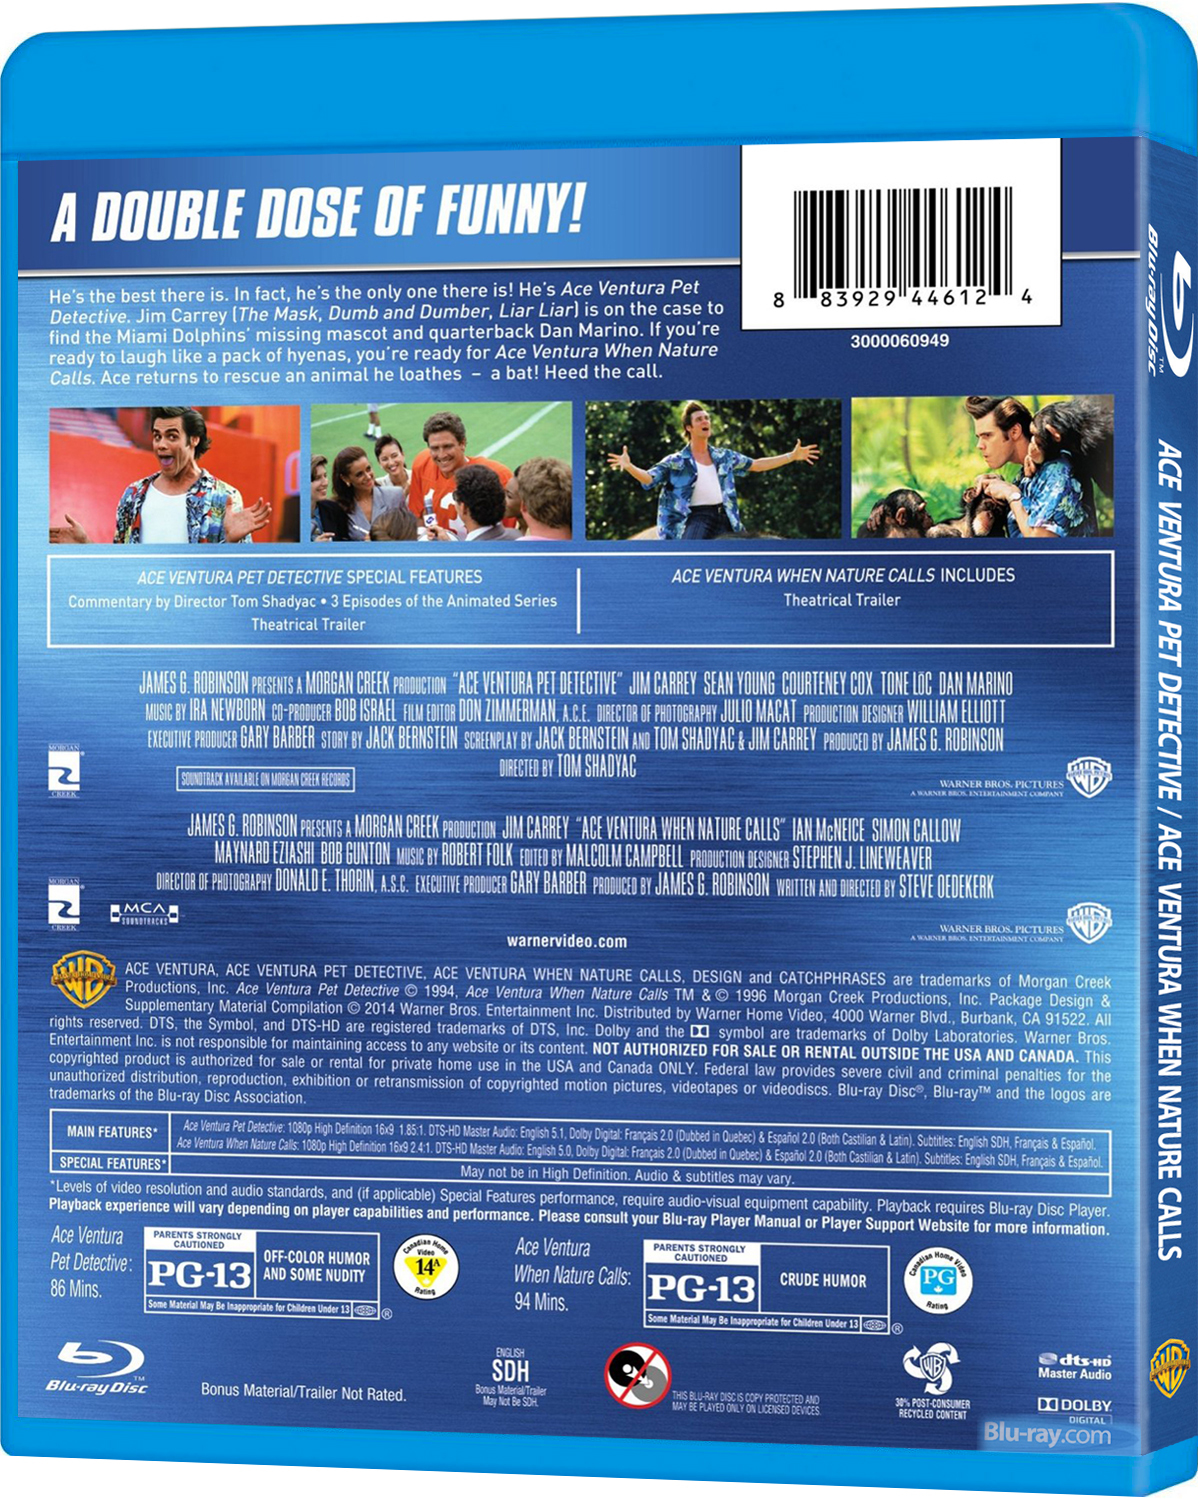 Ace Ventura Pet Detective / When Nature Calls (Sep. 3 2013) - OOP - Page 27  - Blu-ray Forum